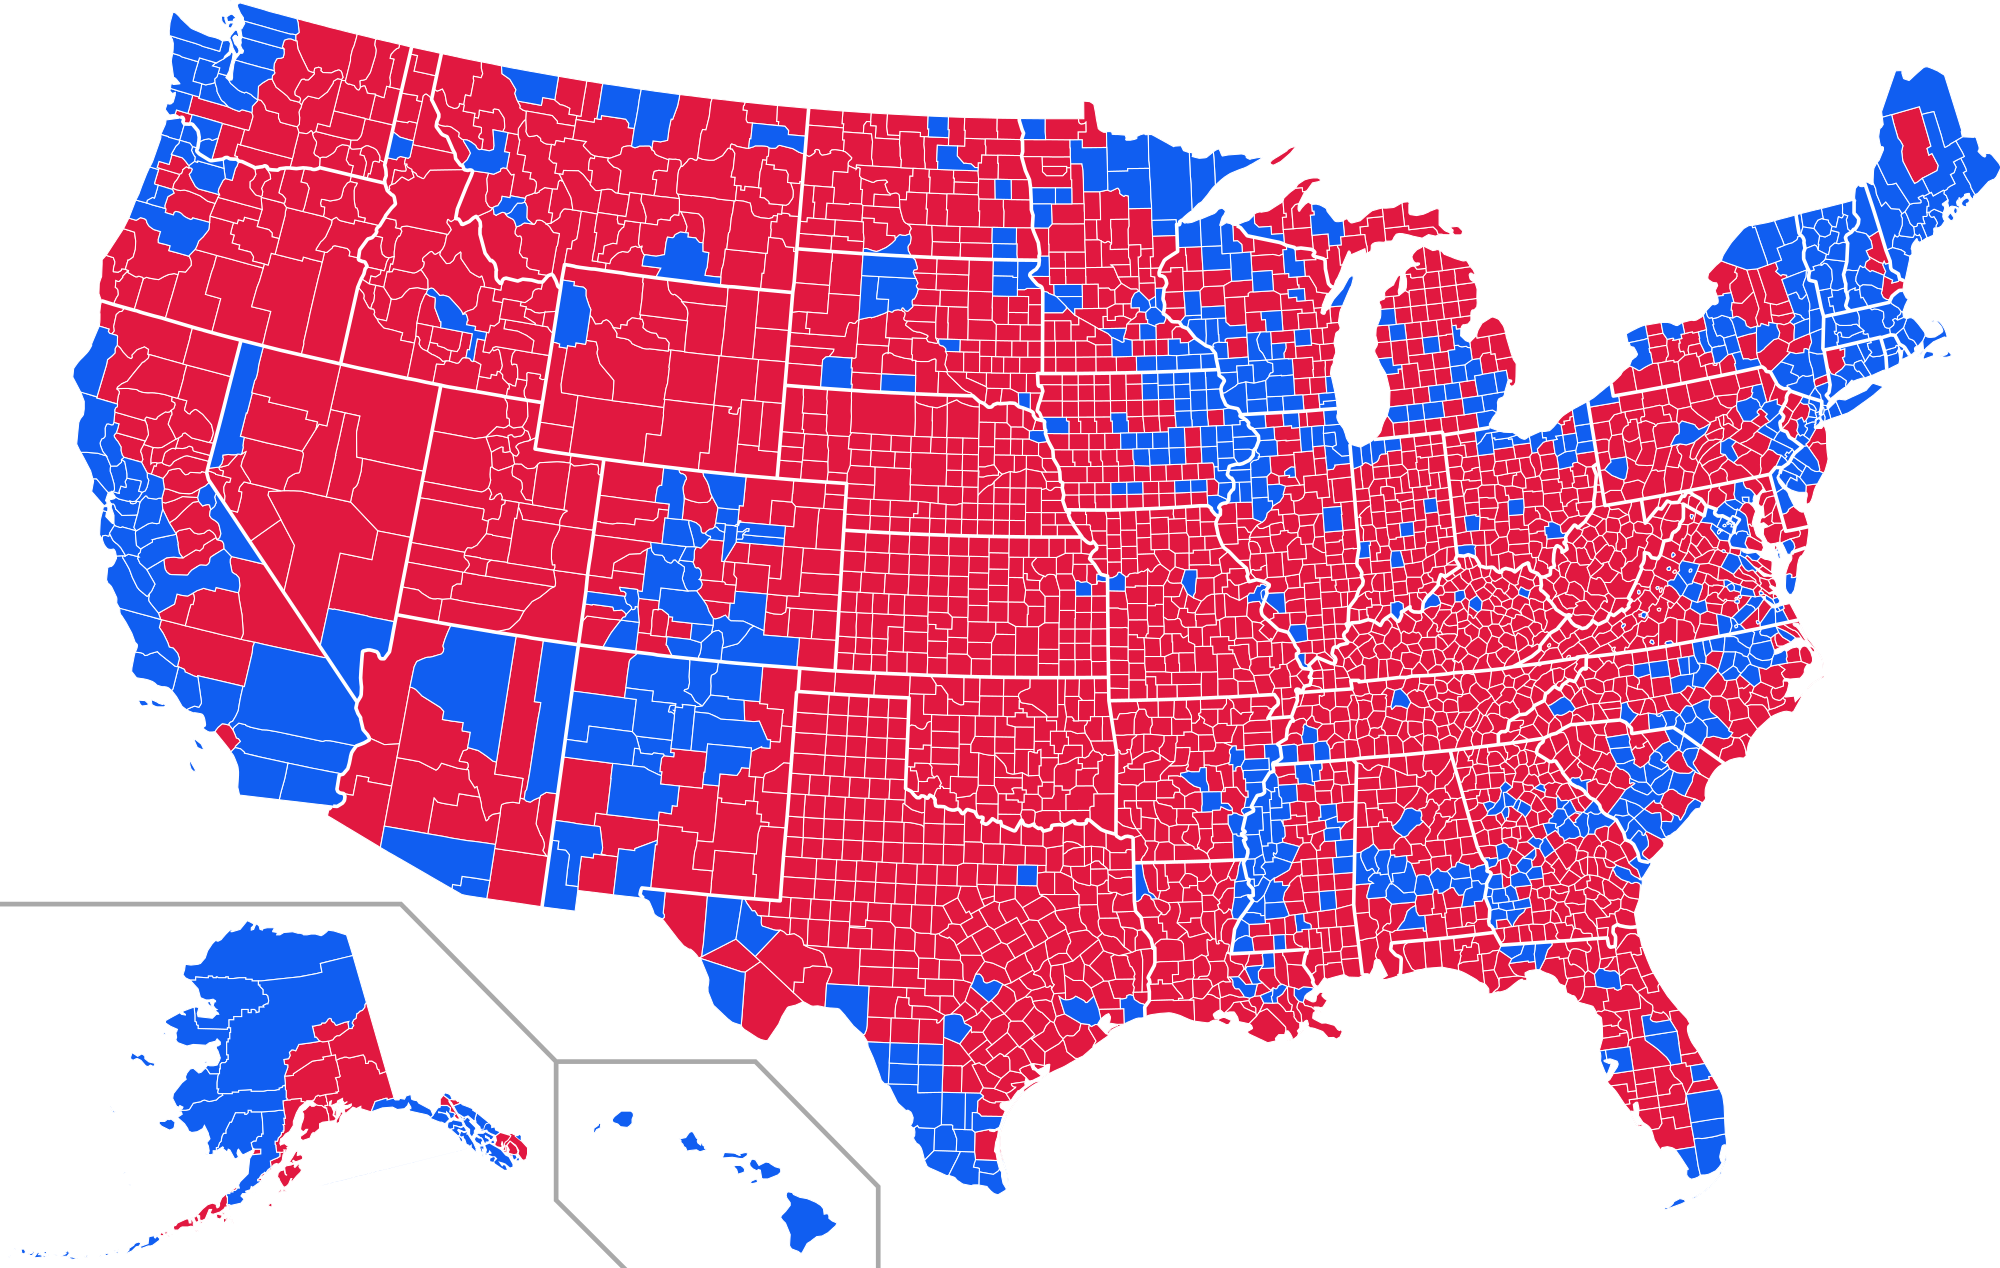 United states wikipedia results. Voting clipart presidential election